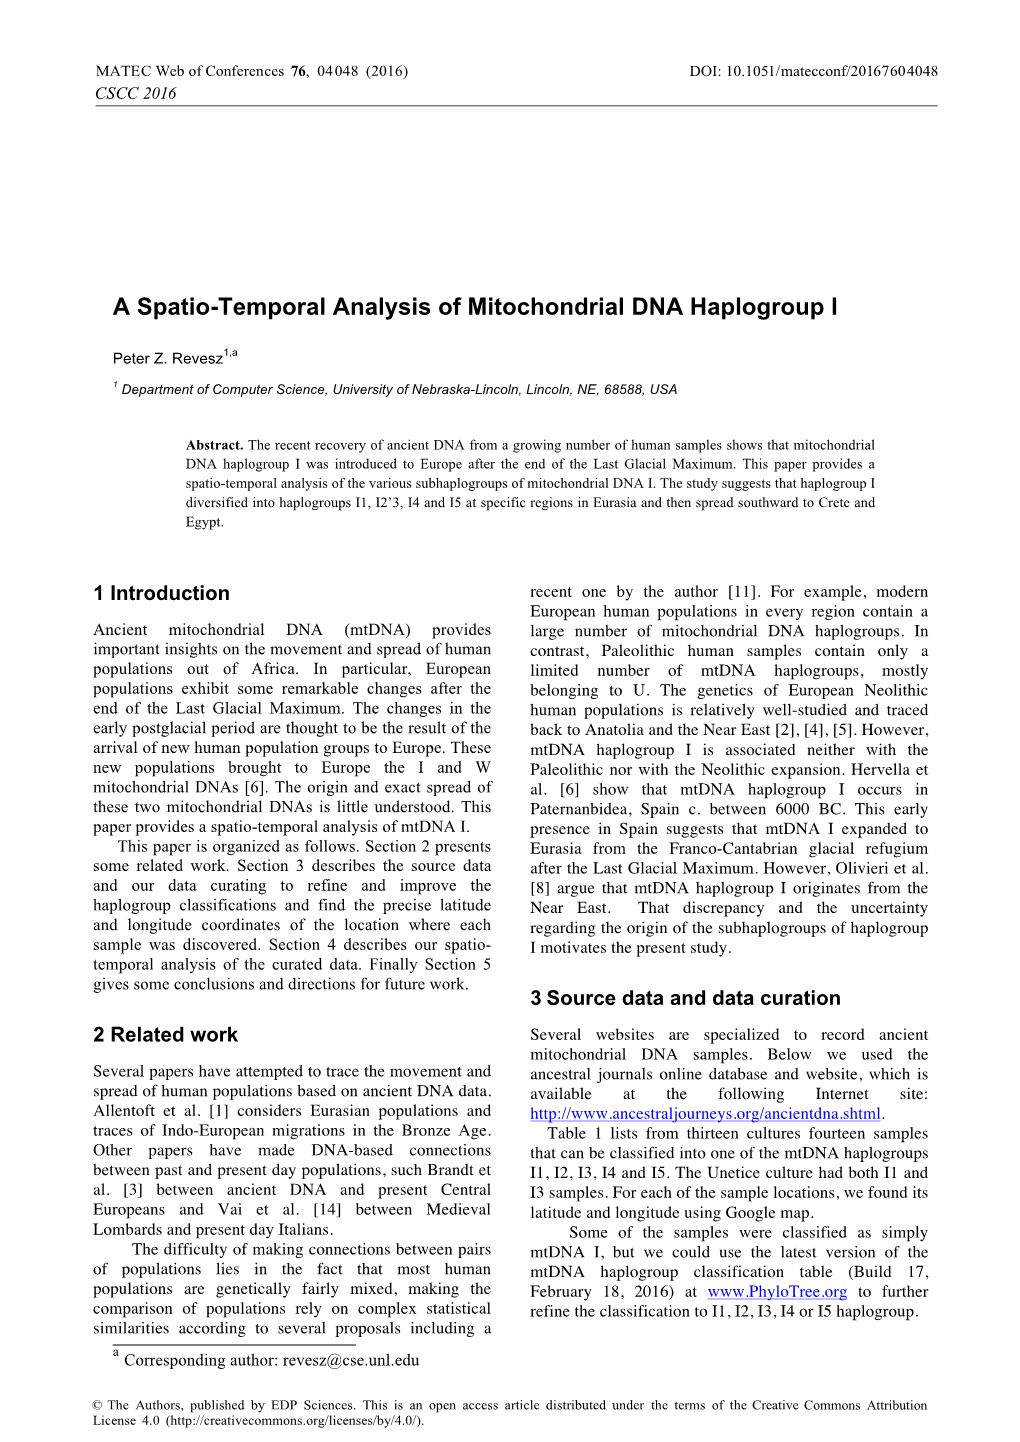 A Spatio-Temporal Analysis of Mitochondrial DNA Haplogroup I